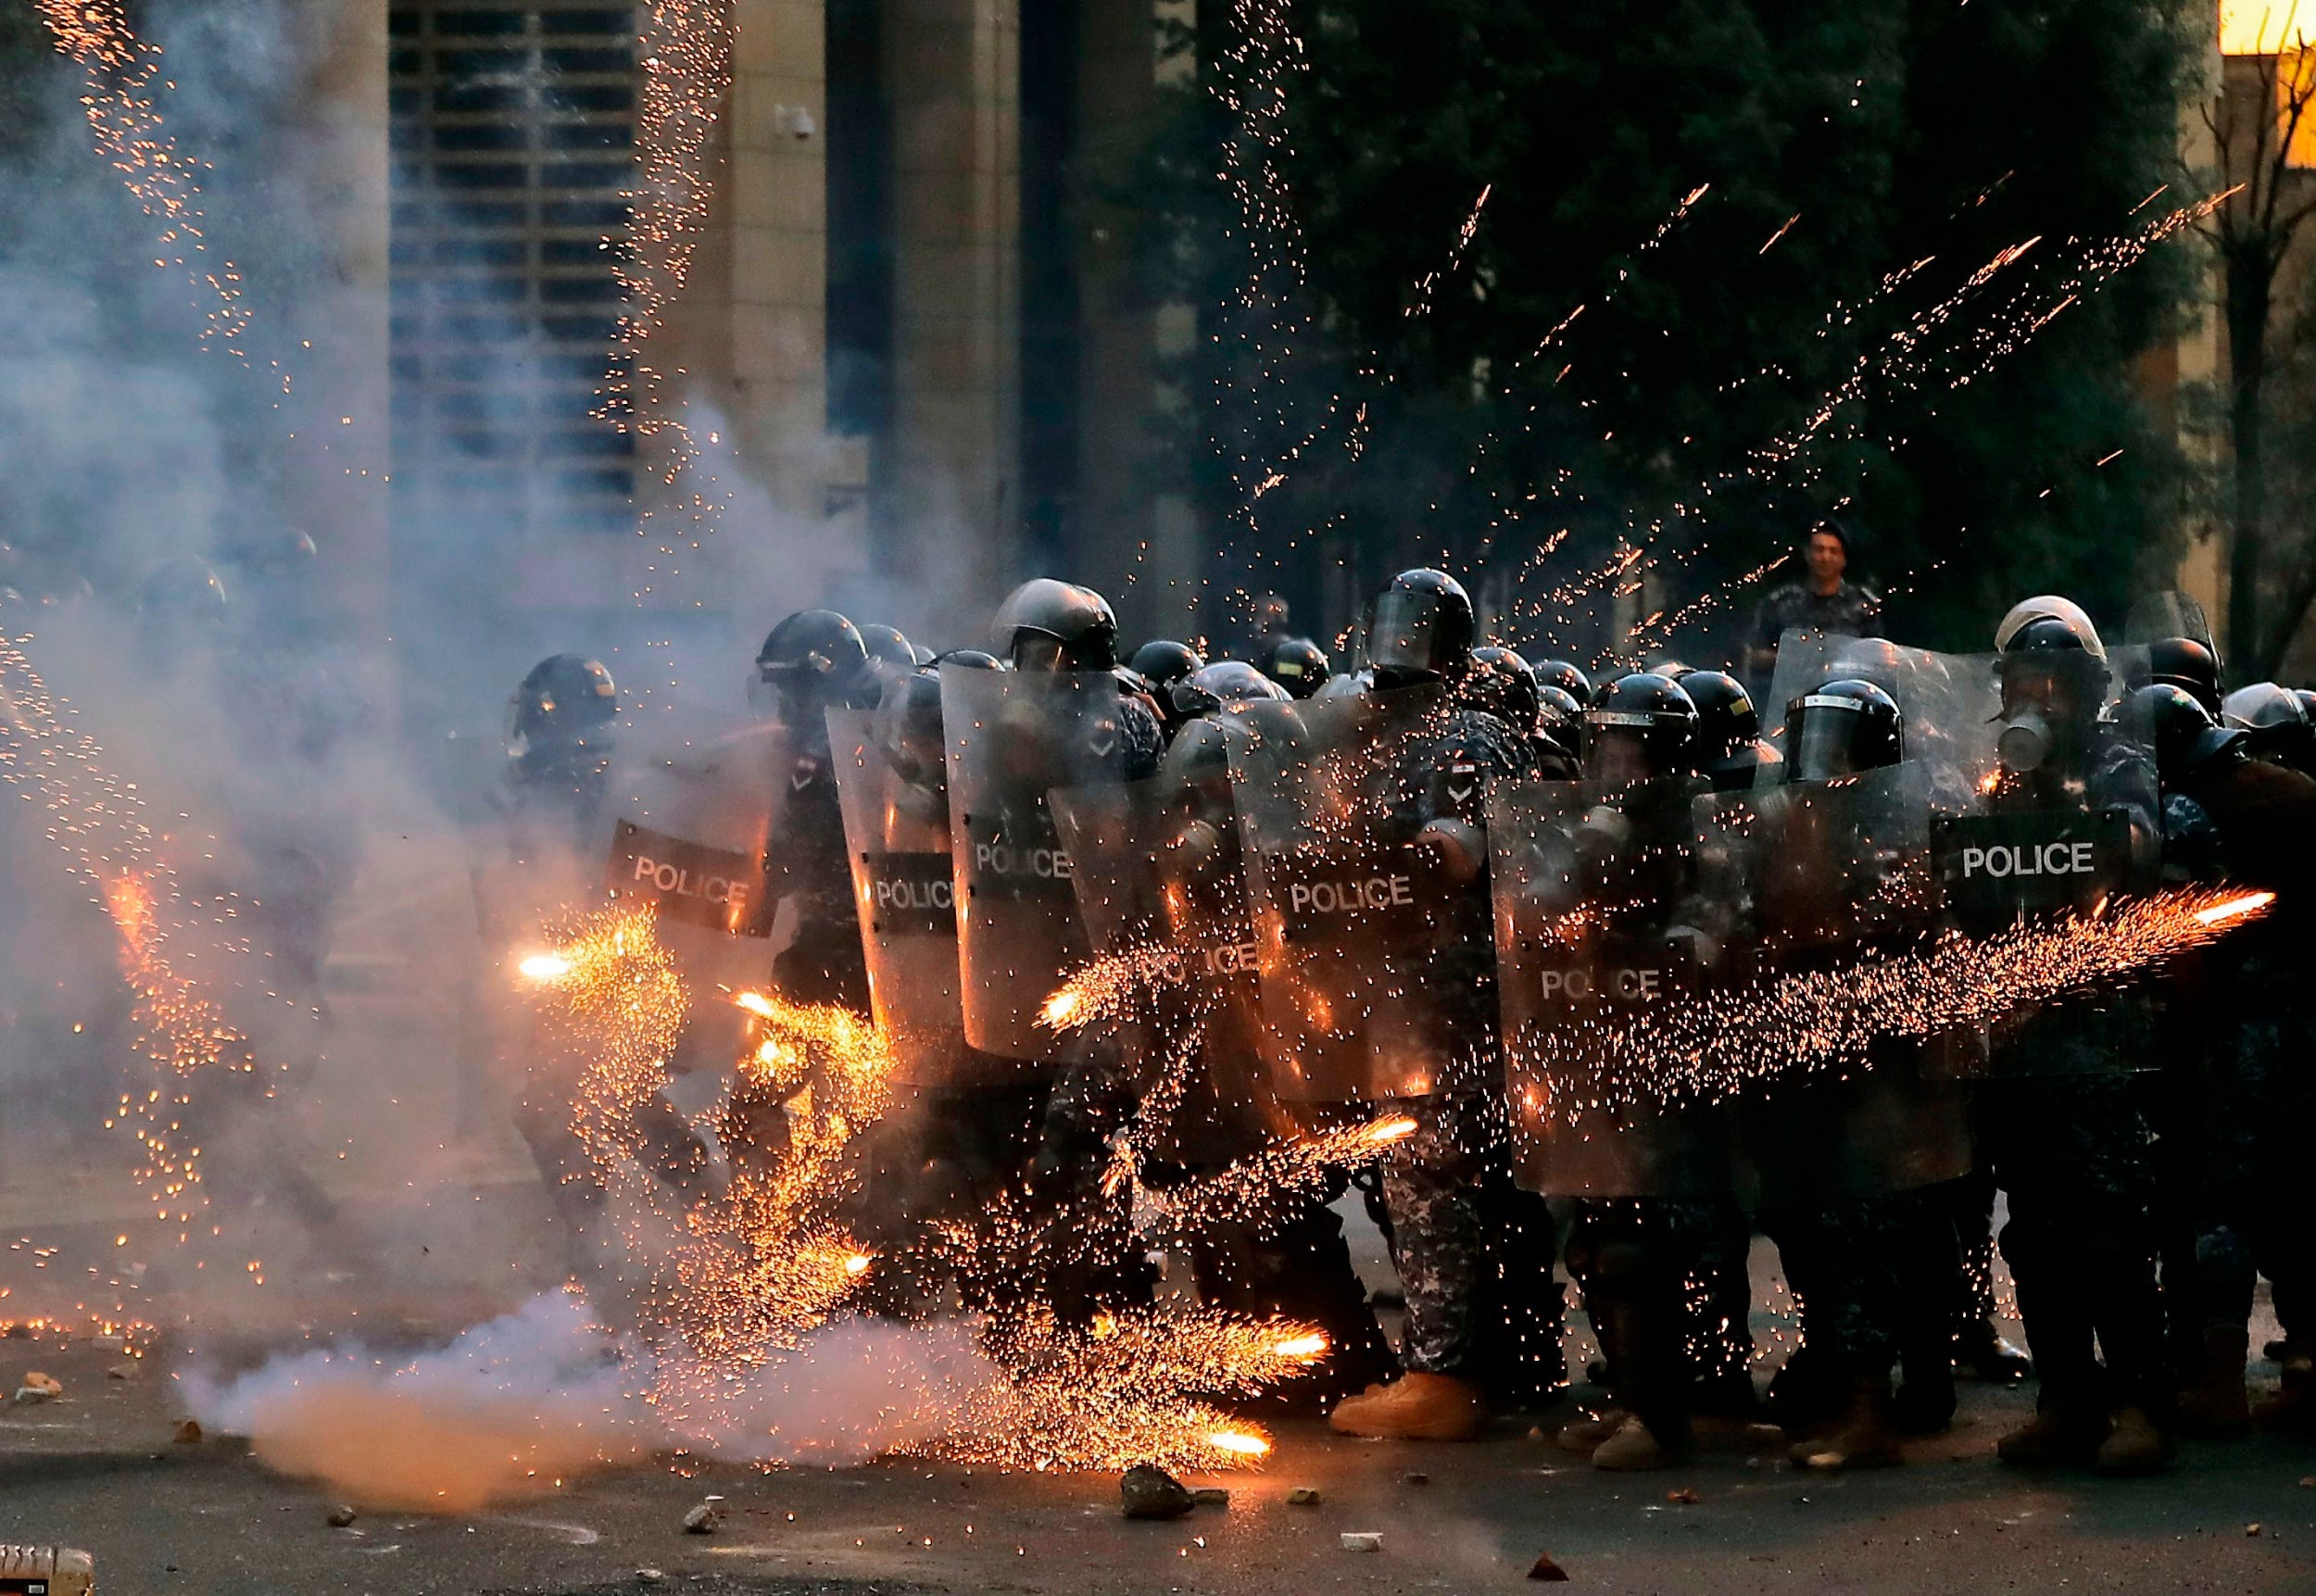 Firecrackers thrown by protesters explode in front of riot police